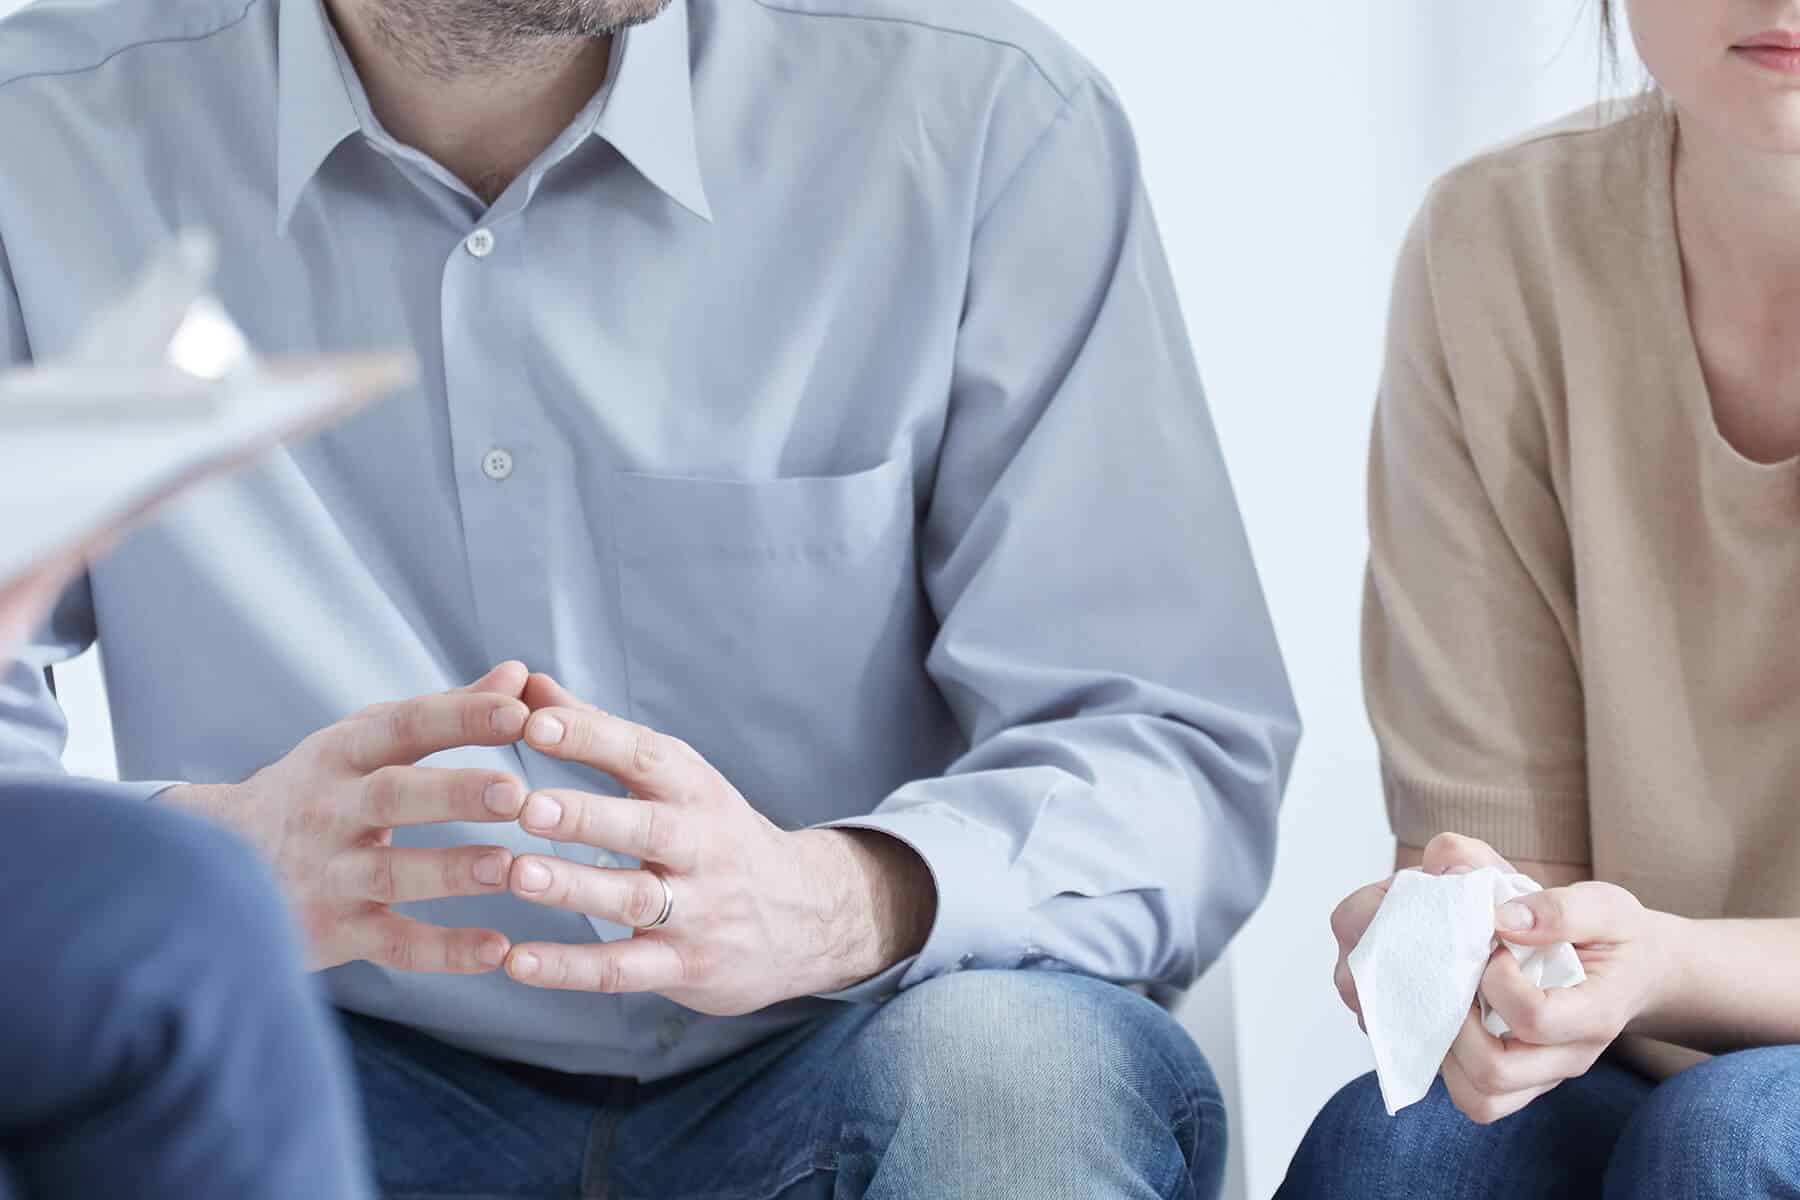 A man and woman sitting in a room, talking about their marriage relationship, while a lawyer is listening and taking notes.